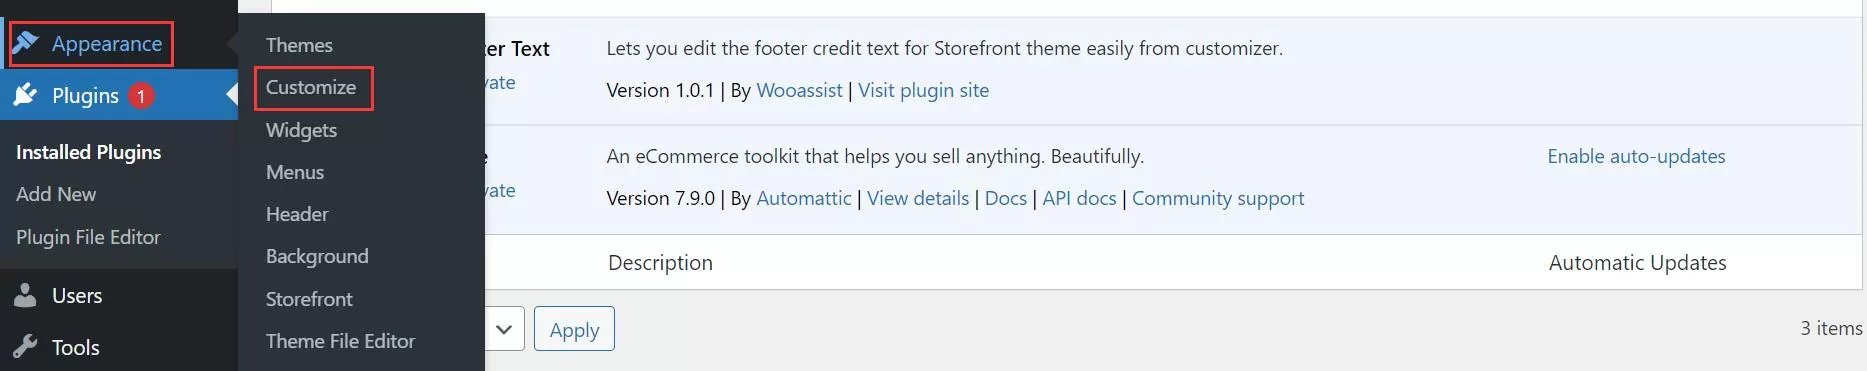 customize storefront footer text